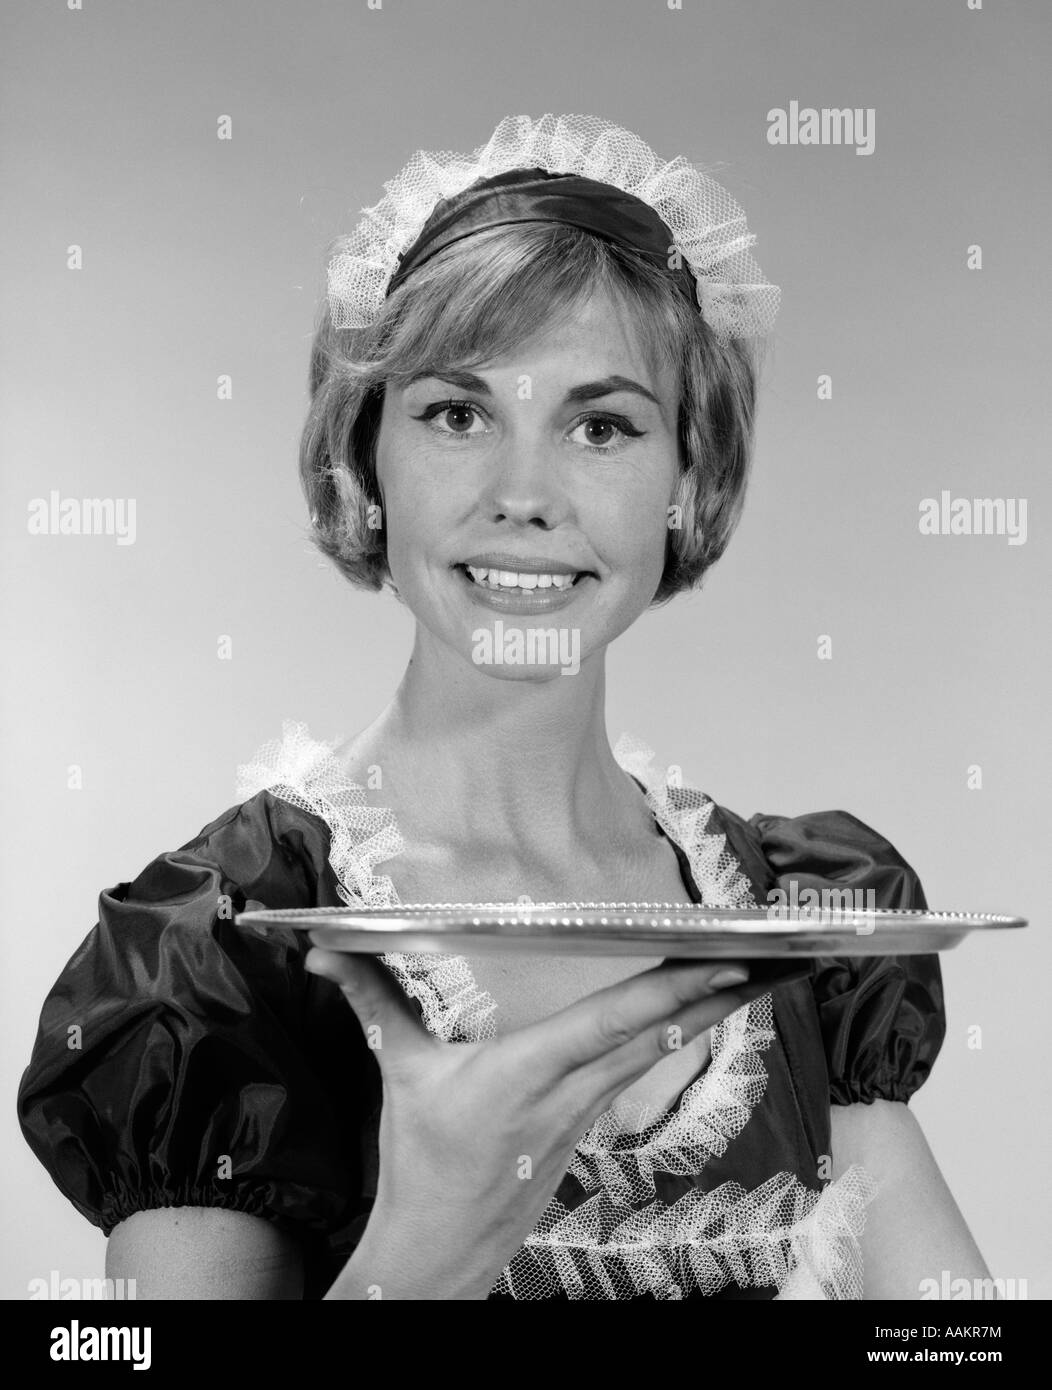 Waitress outfit Black and White Stock Photos & Images - Alamy